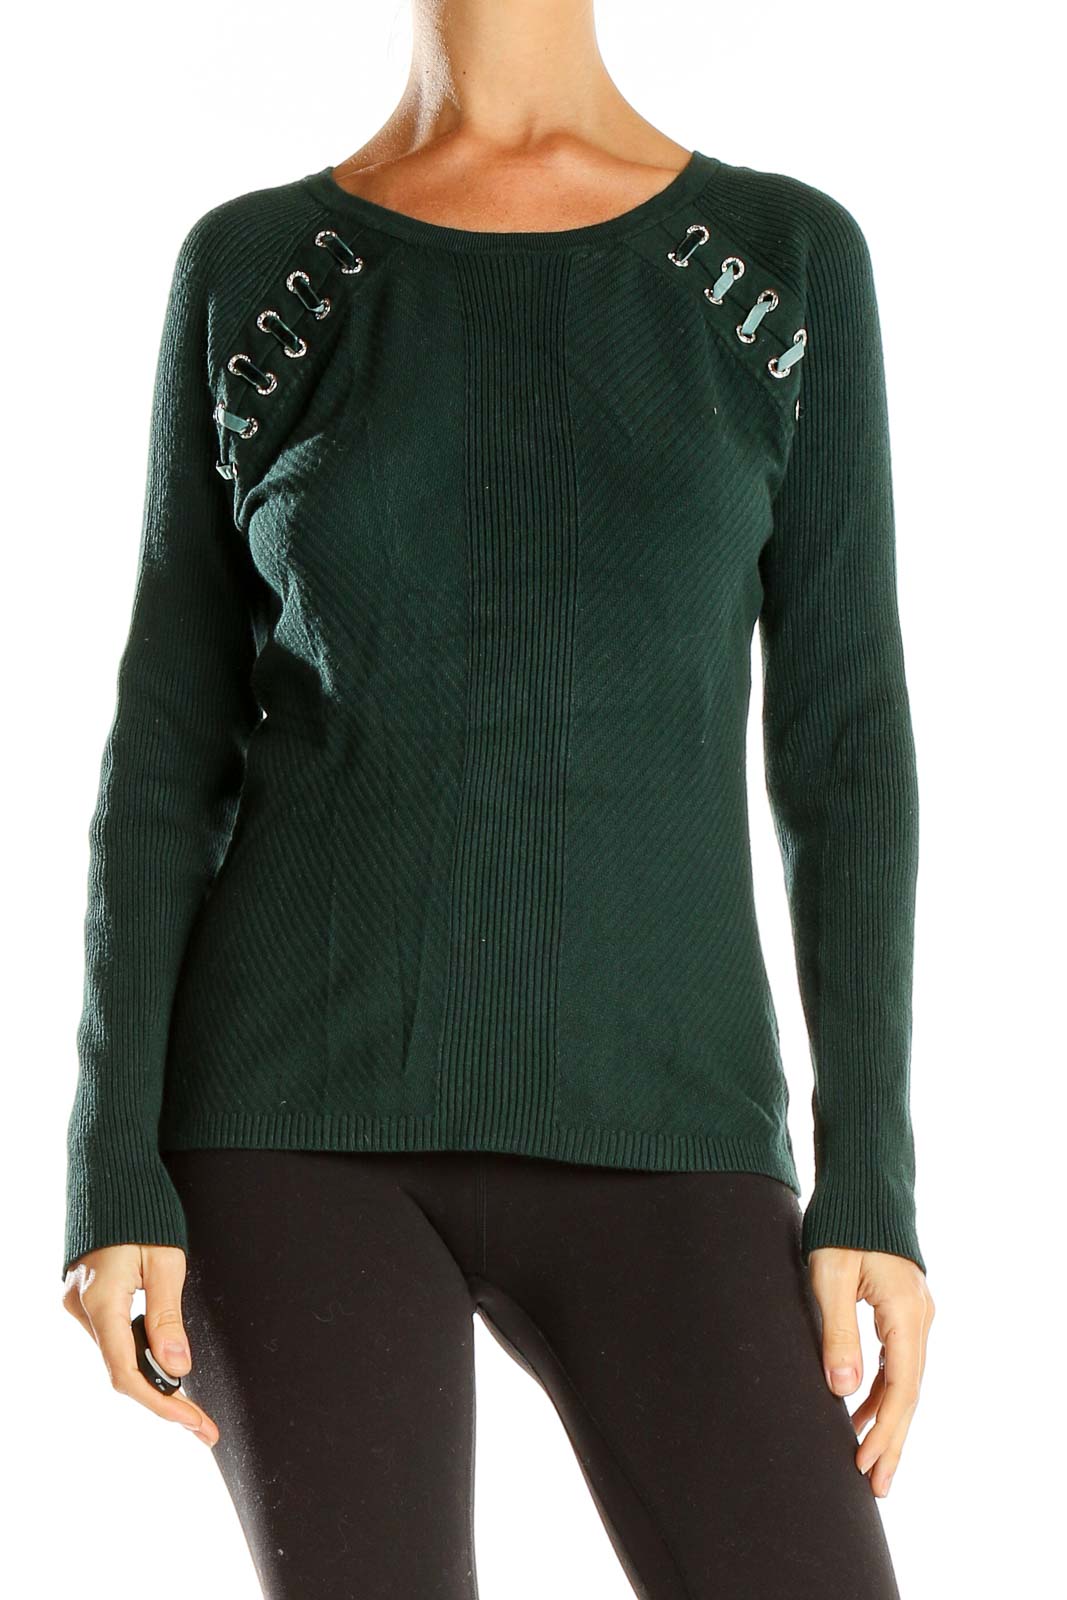 Green Fitted Lace Up Detail Sweater Front